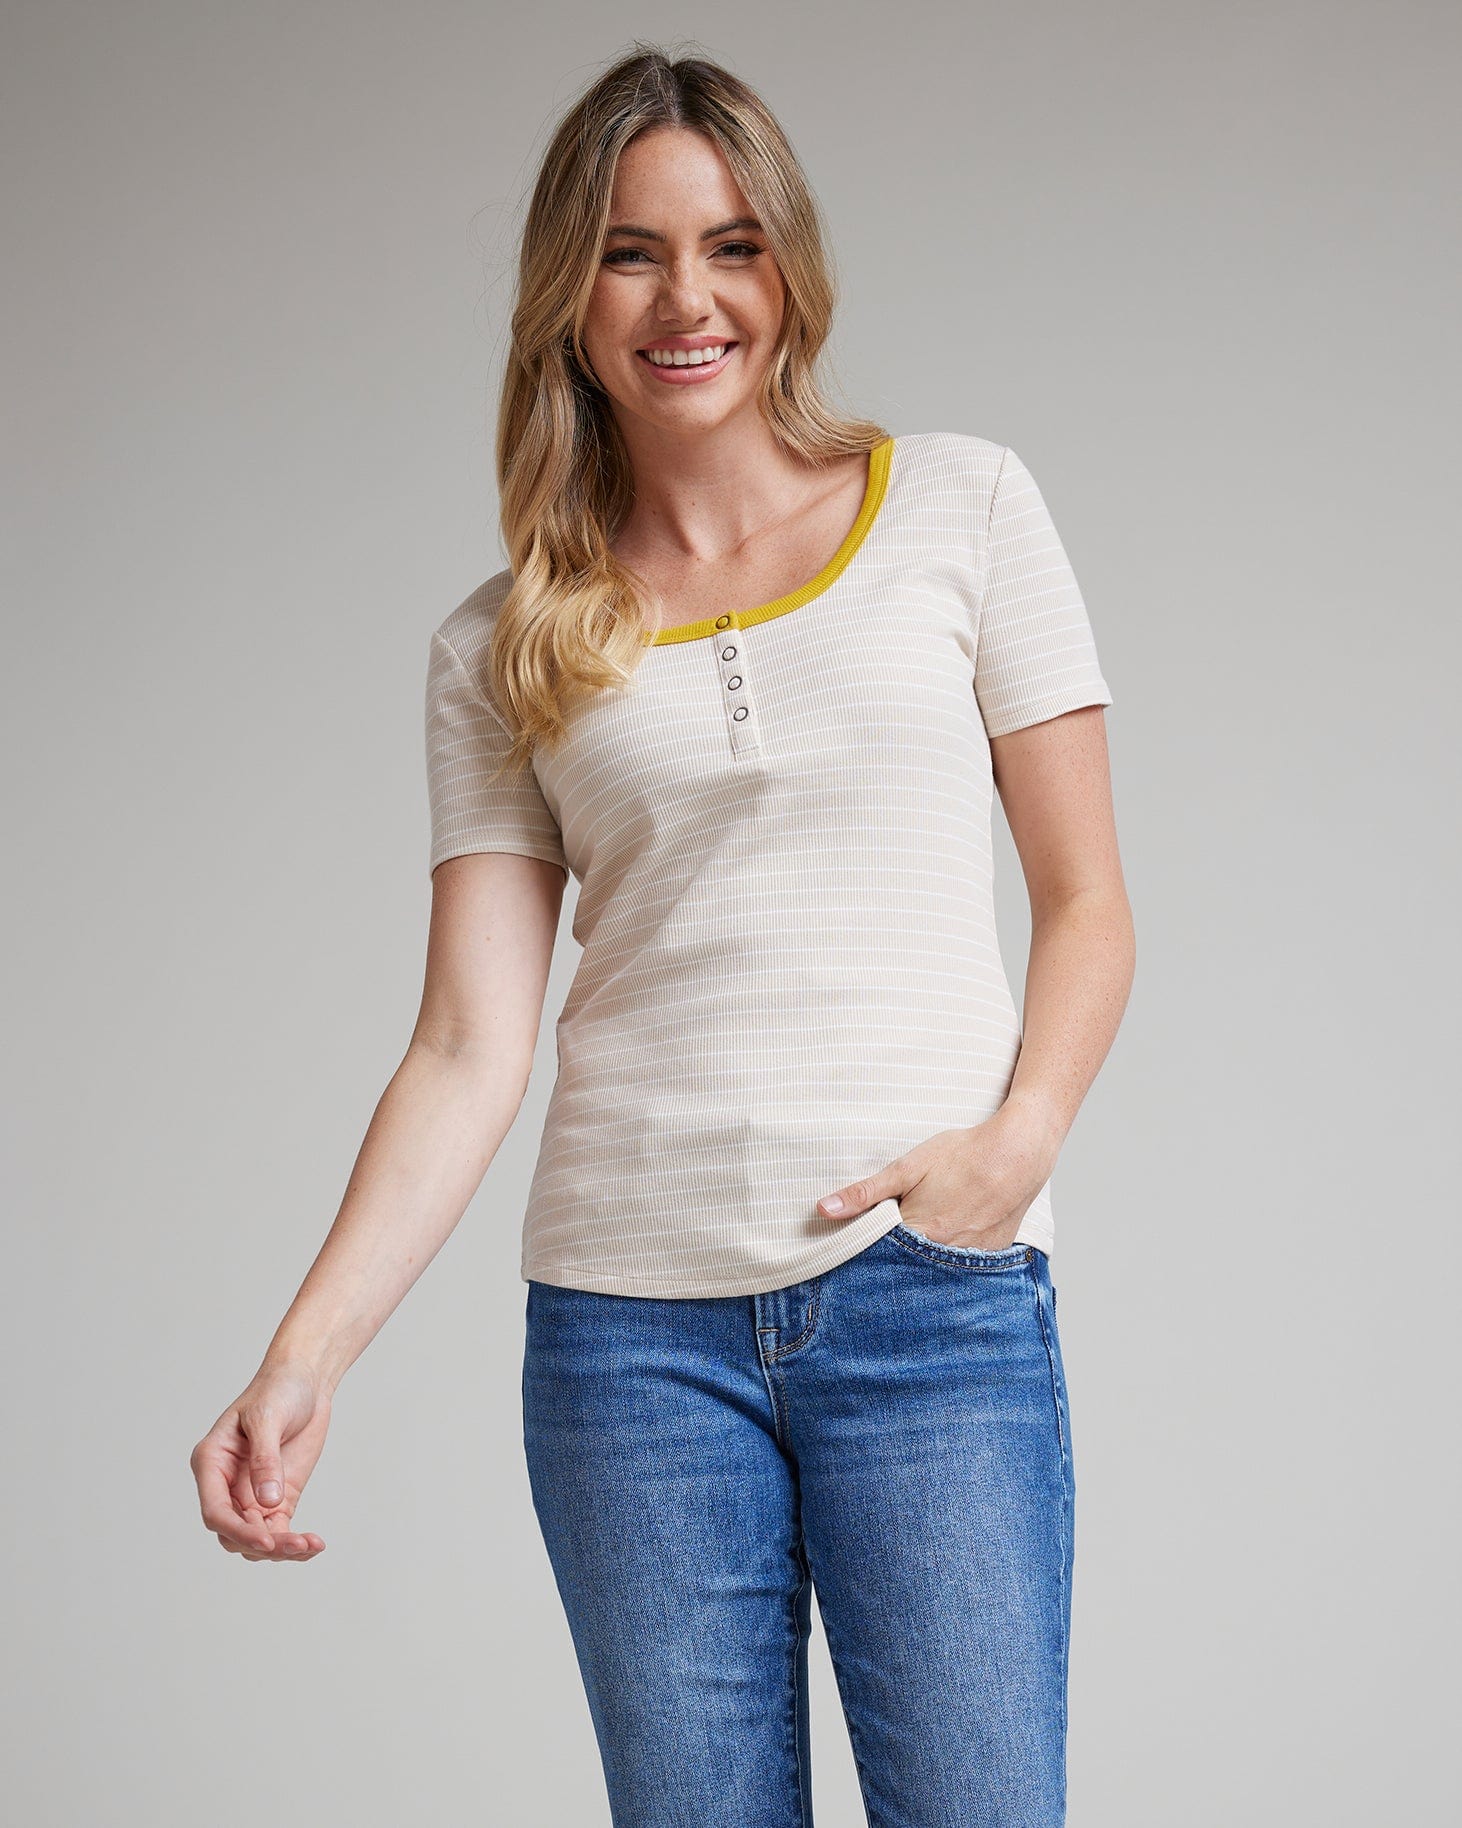 Woman in a white and yellow striped short sleeve t-shirt